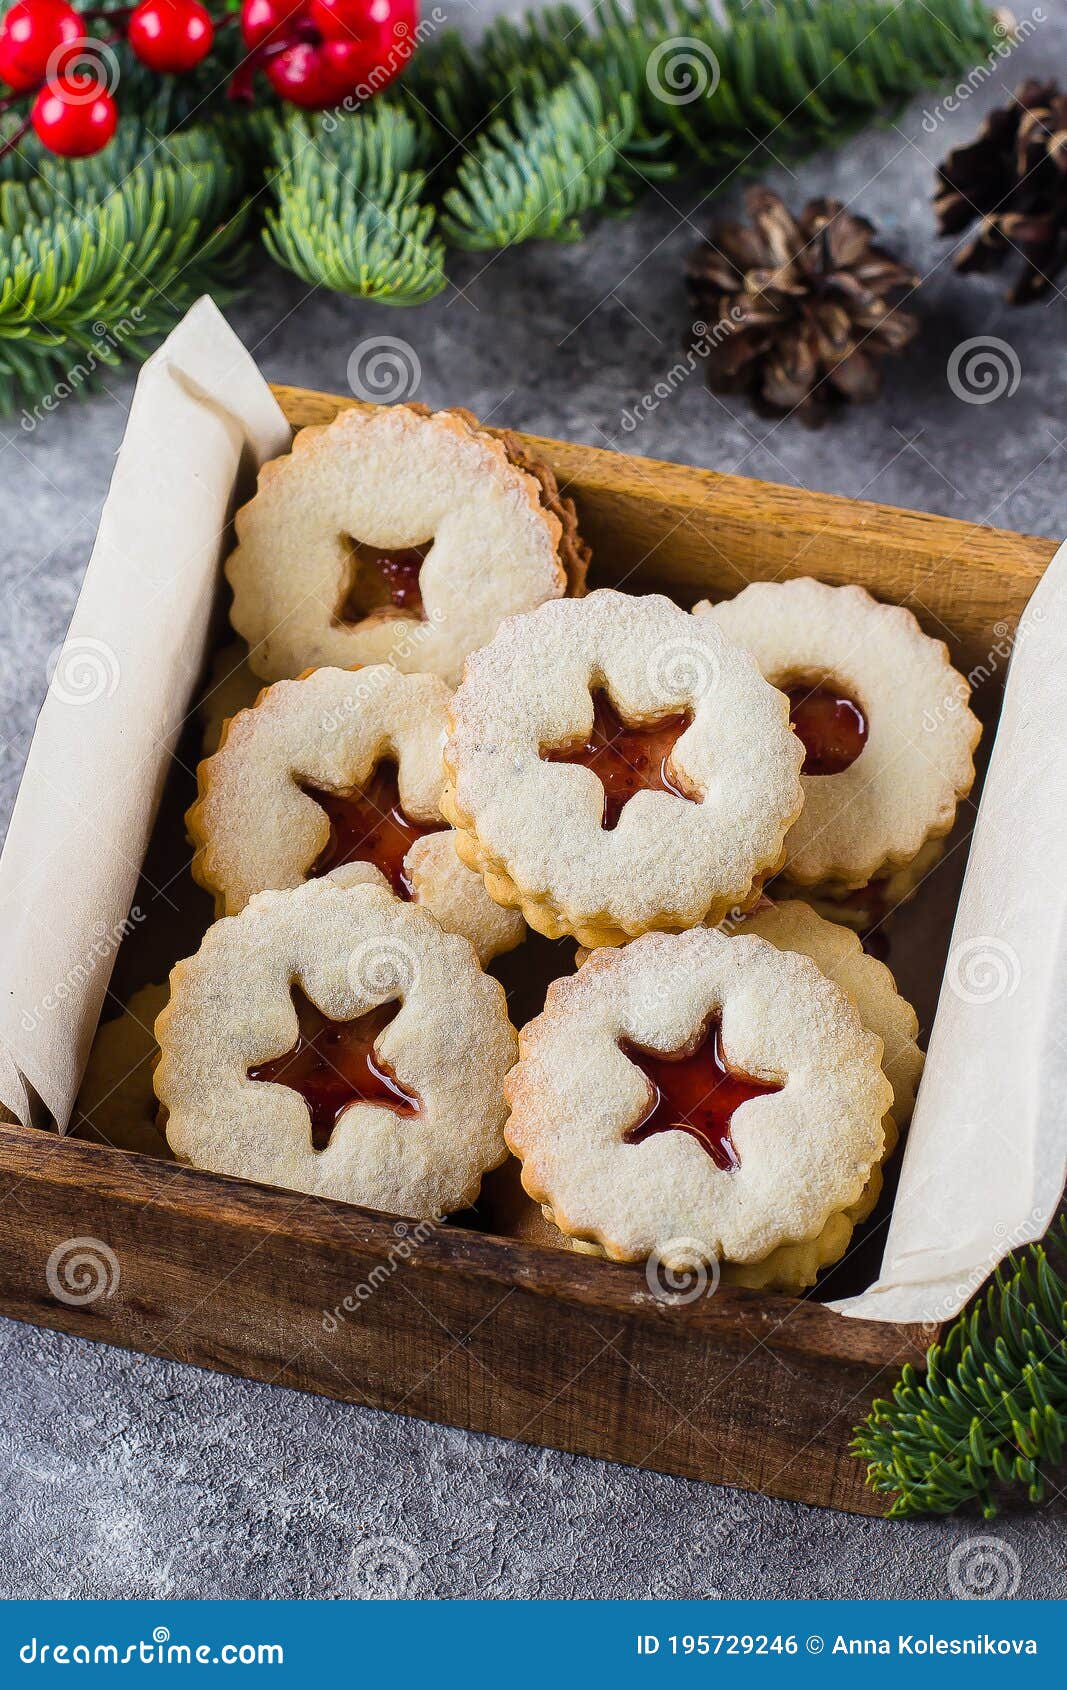 1 465 Austrian Cookies Photos Free Royalty Free Stock Photos From Dreamstime